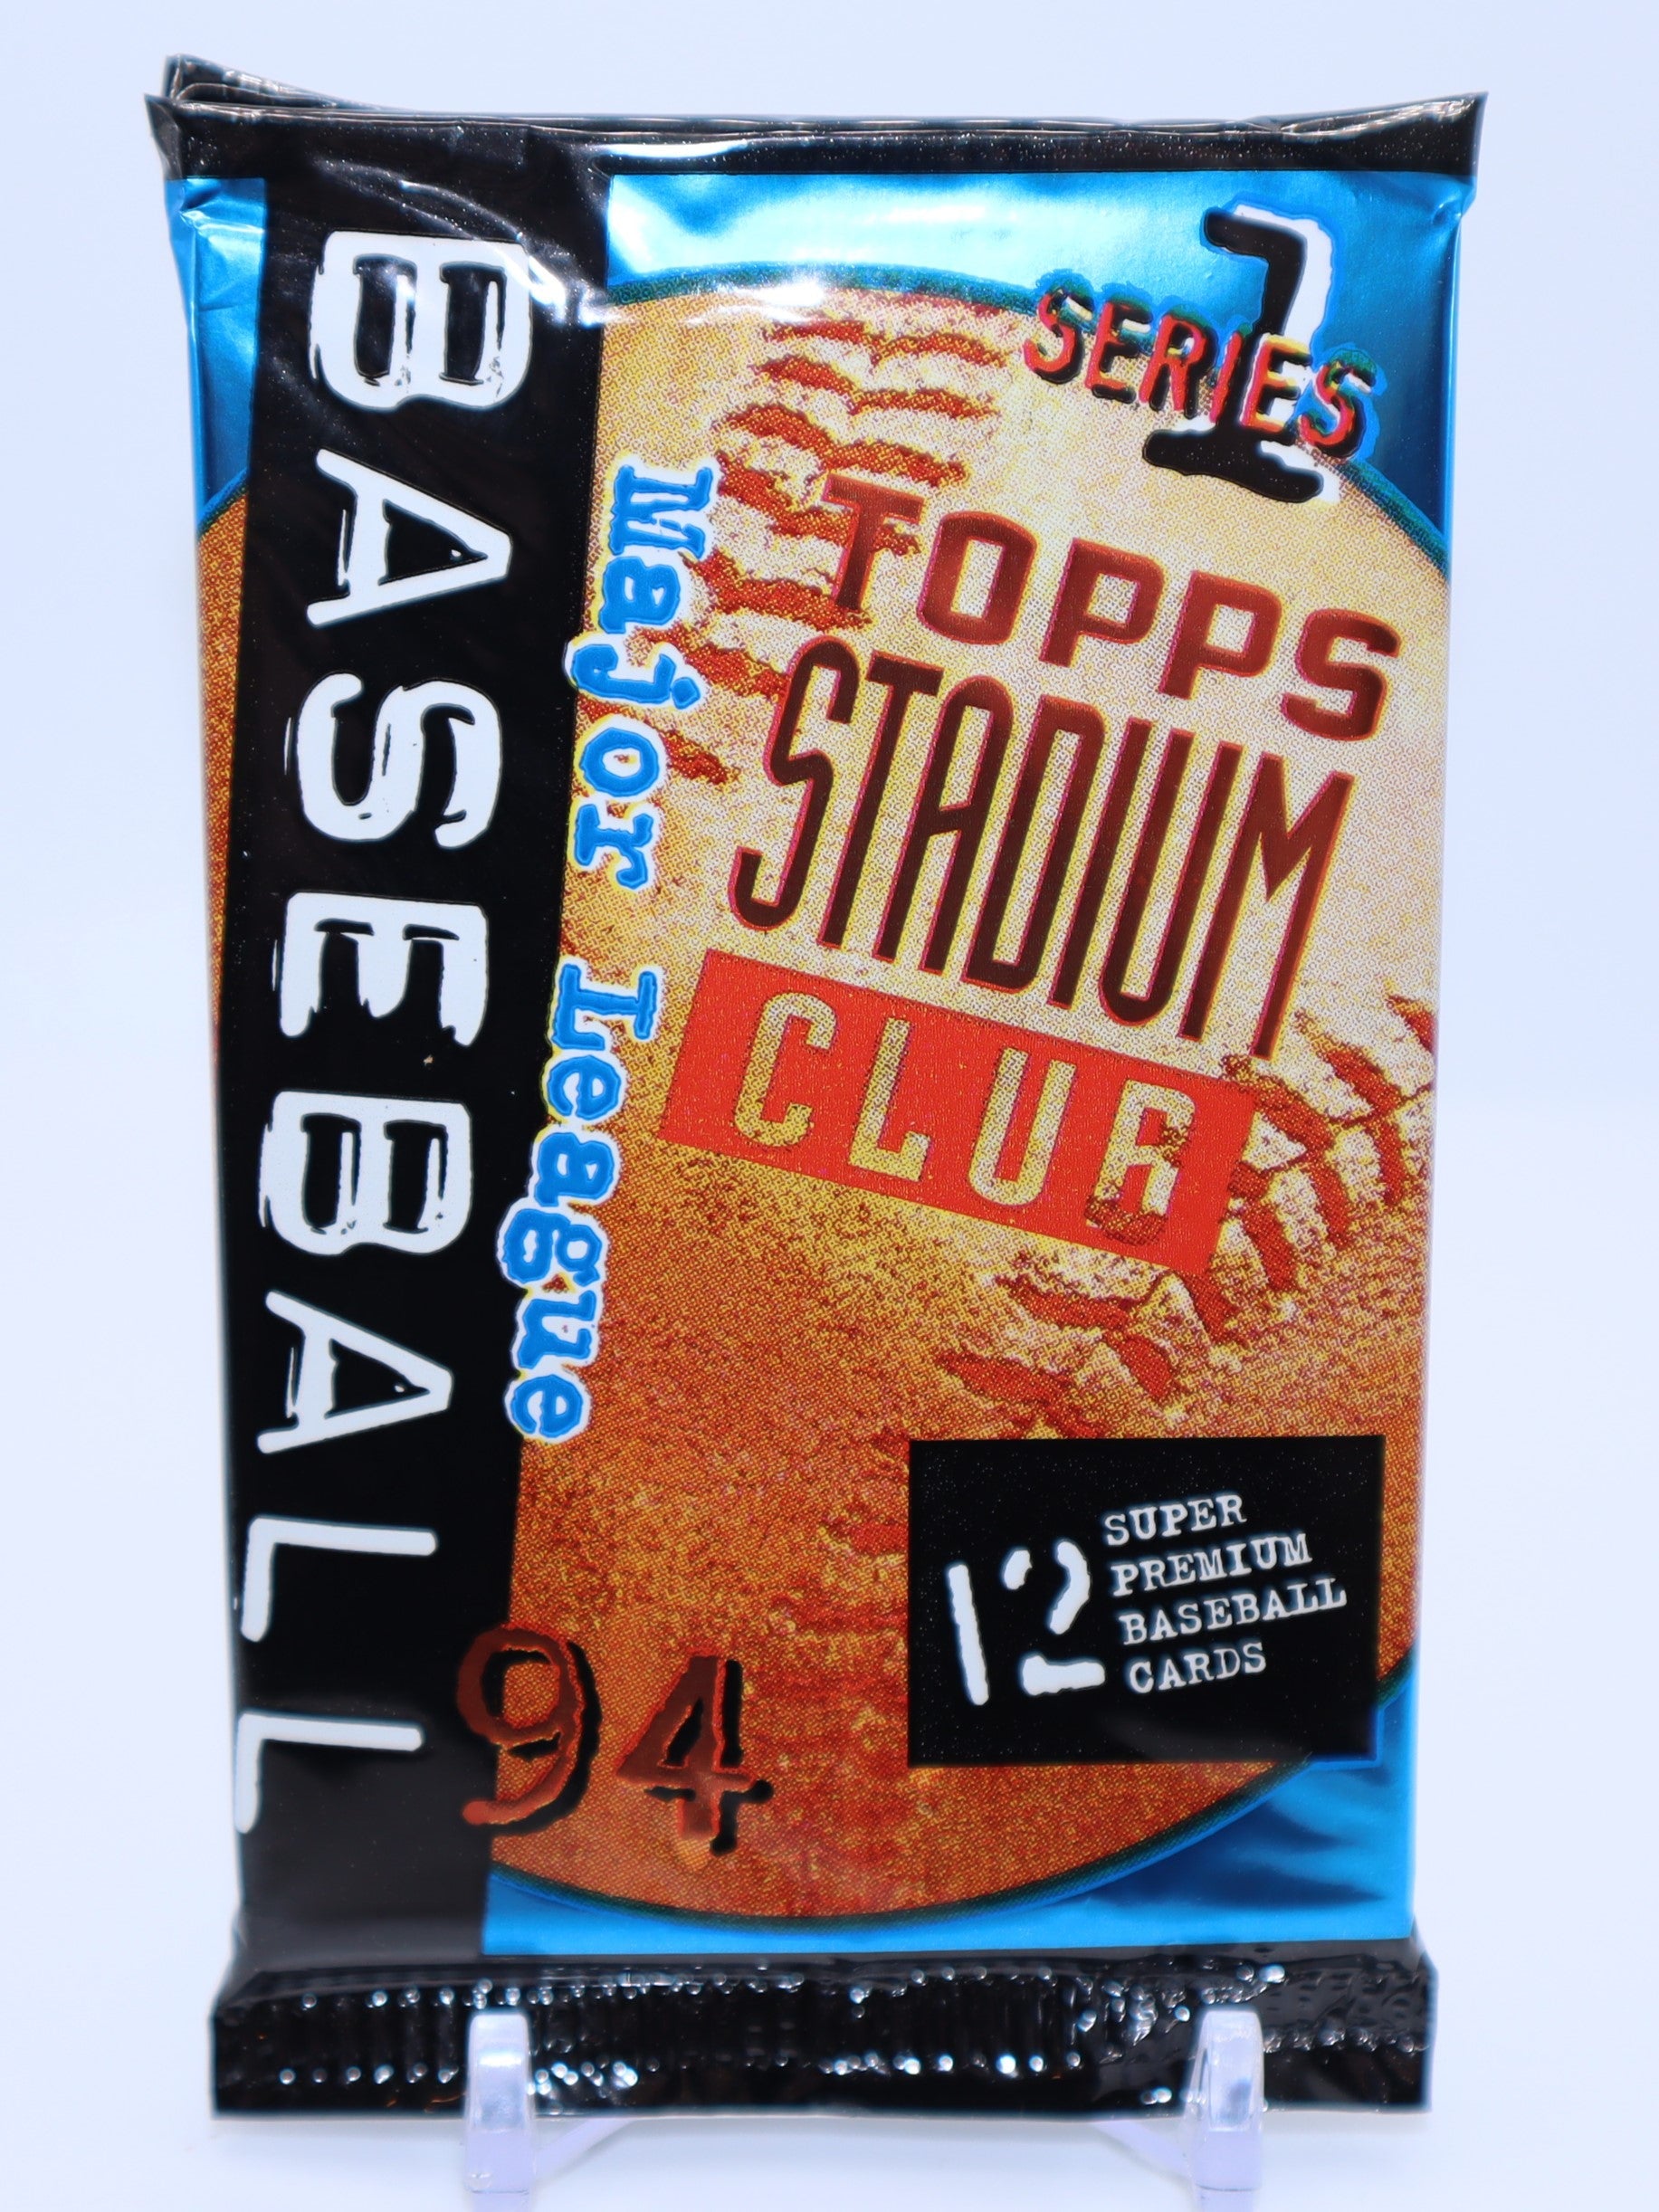 1994 Topps Stadium Club Series 1 Baseball Cards Wax Pack - Collectibles